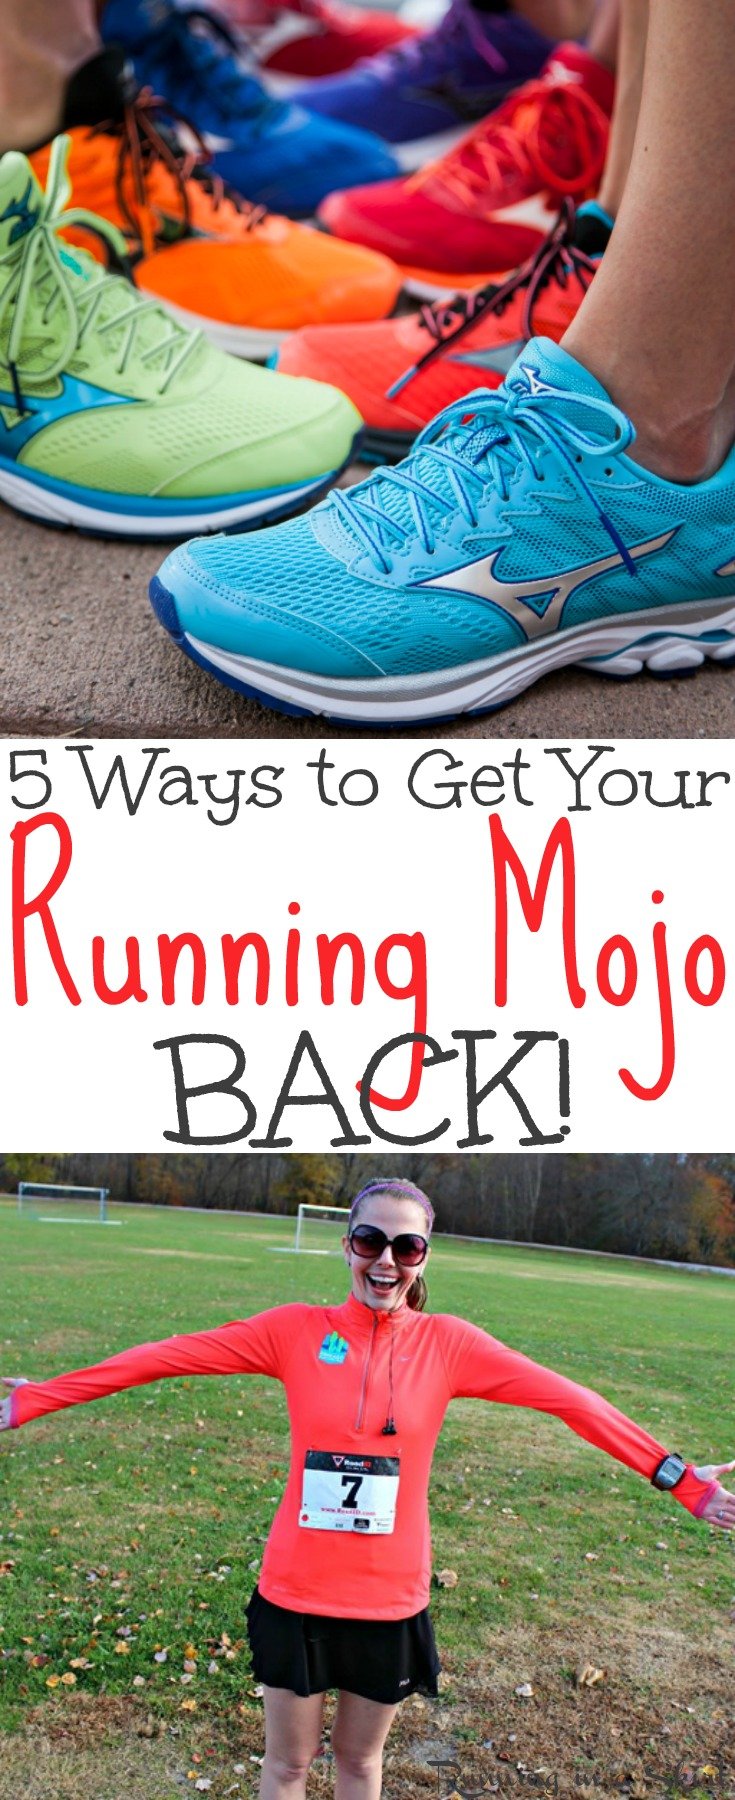 5 Ways to Get Your Running Mojo Back - fitness running motivation and mental tips for runners who are struggling to stay motivated. Simple ways to get back to jogging, treadmill running or trail running - no excuses! / Running in a Skirt via @juliewunder